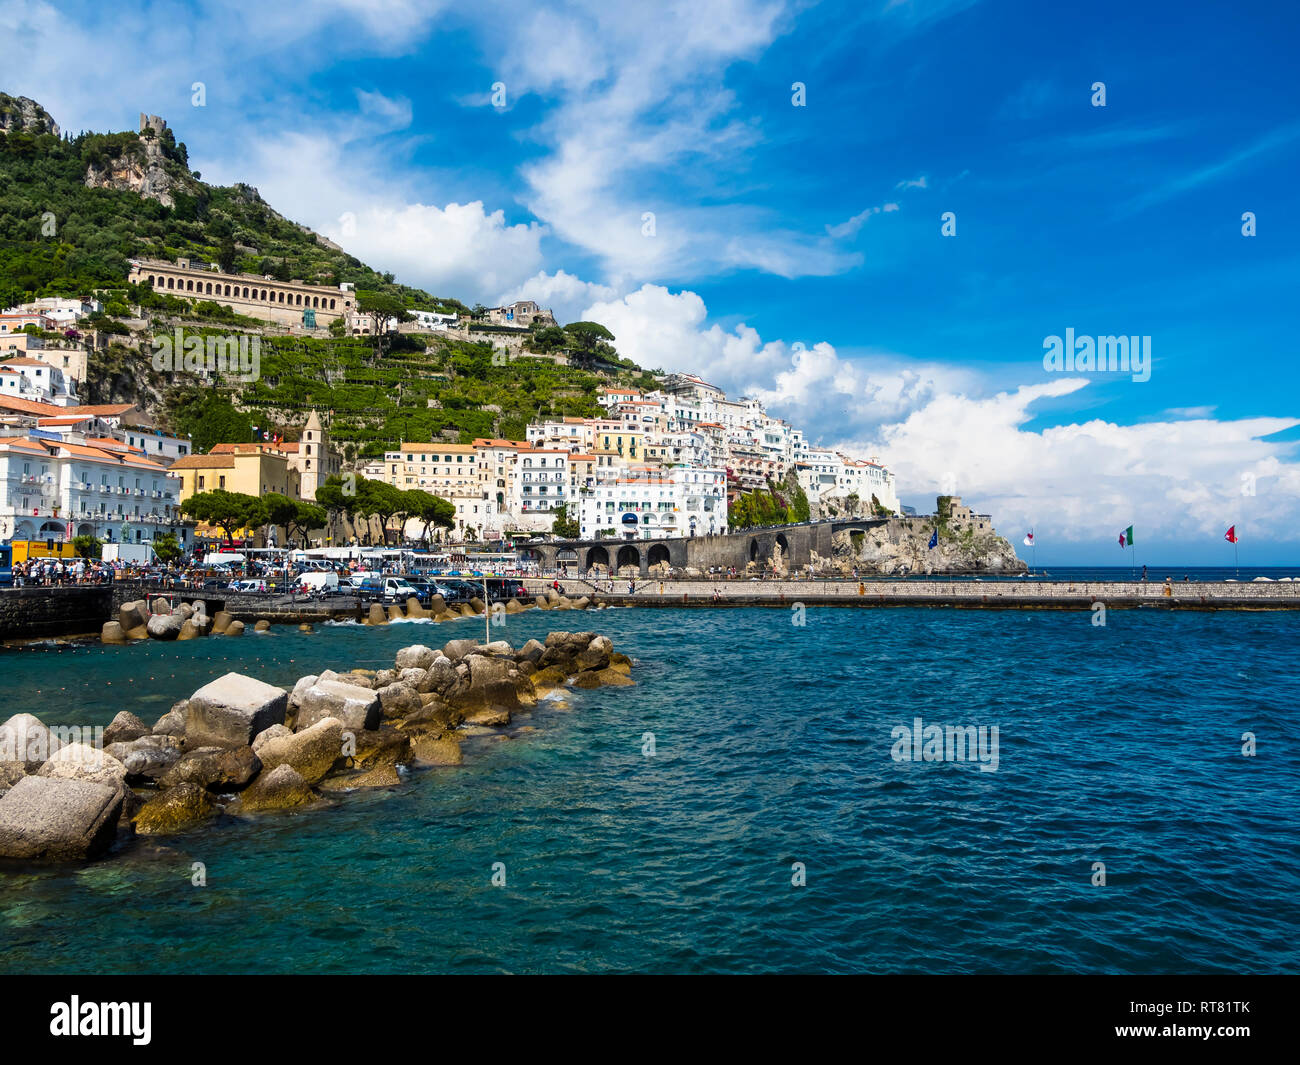 Italy, Amalfi, view to the historic old town Stock Photo